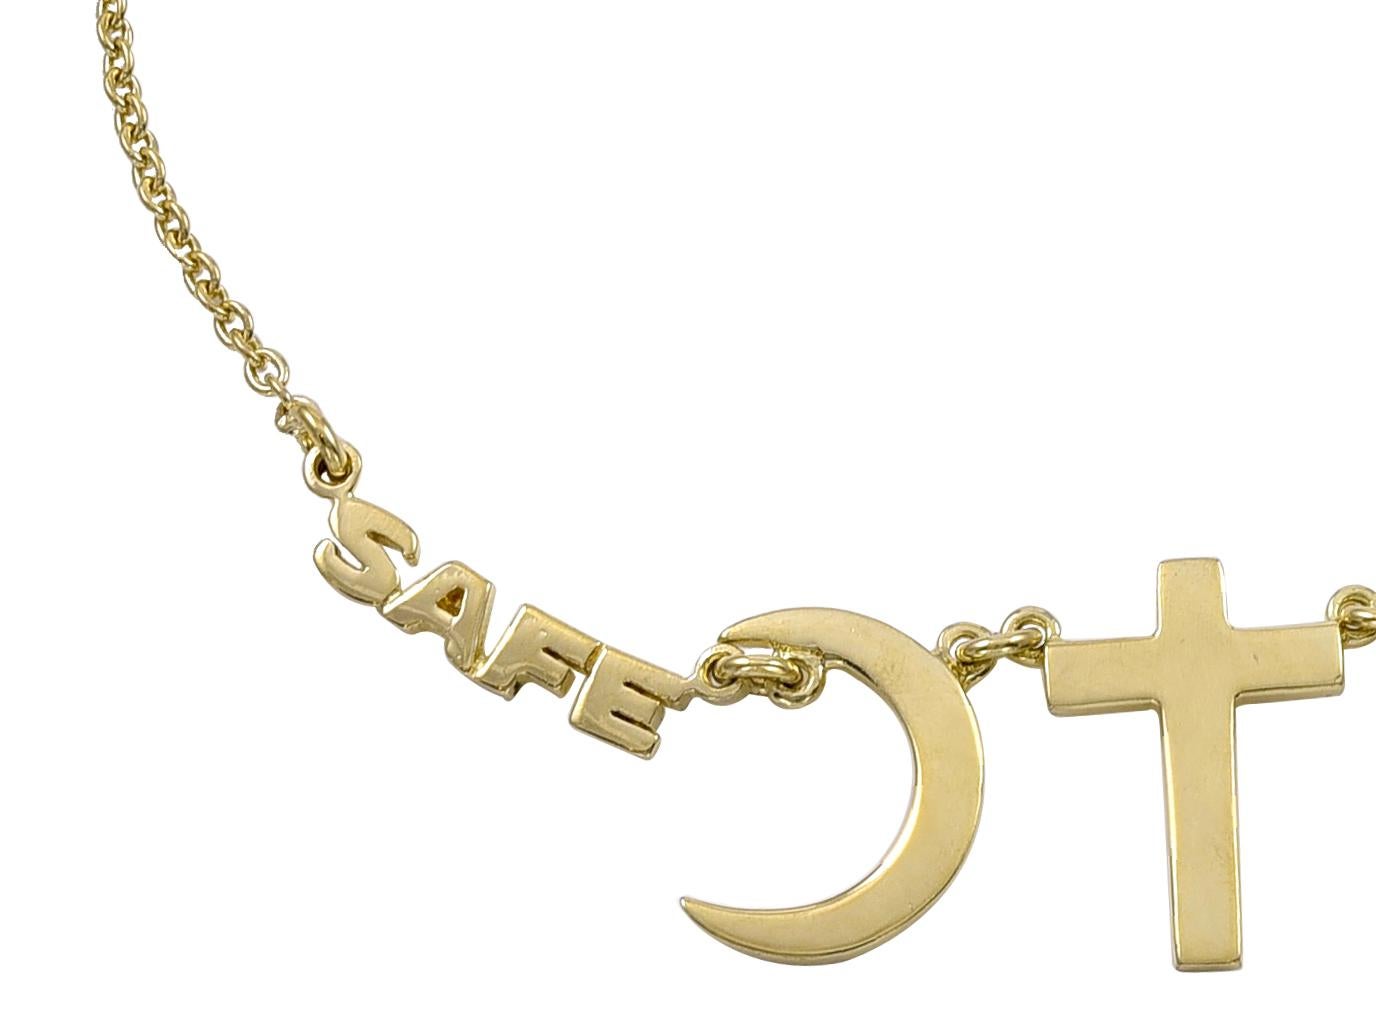 Unique necklace, with symbols representing the Muslim, Christian and Jewish religions.  On either side of the symbols, there are letters spelling out 